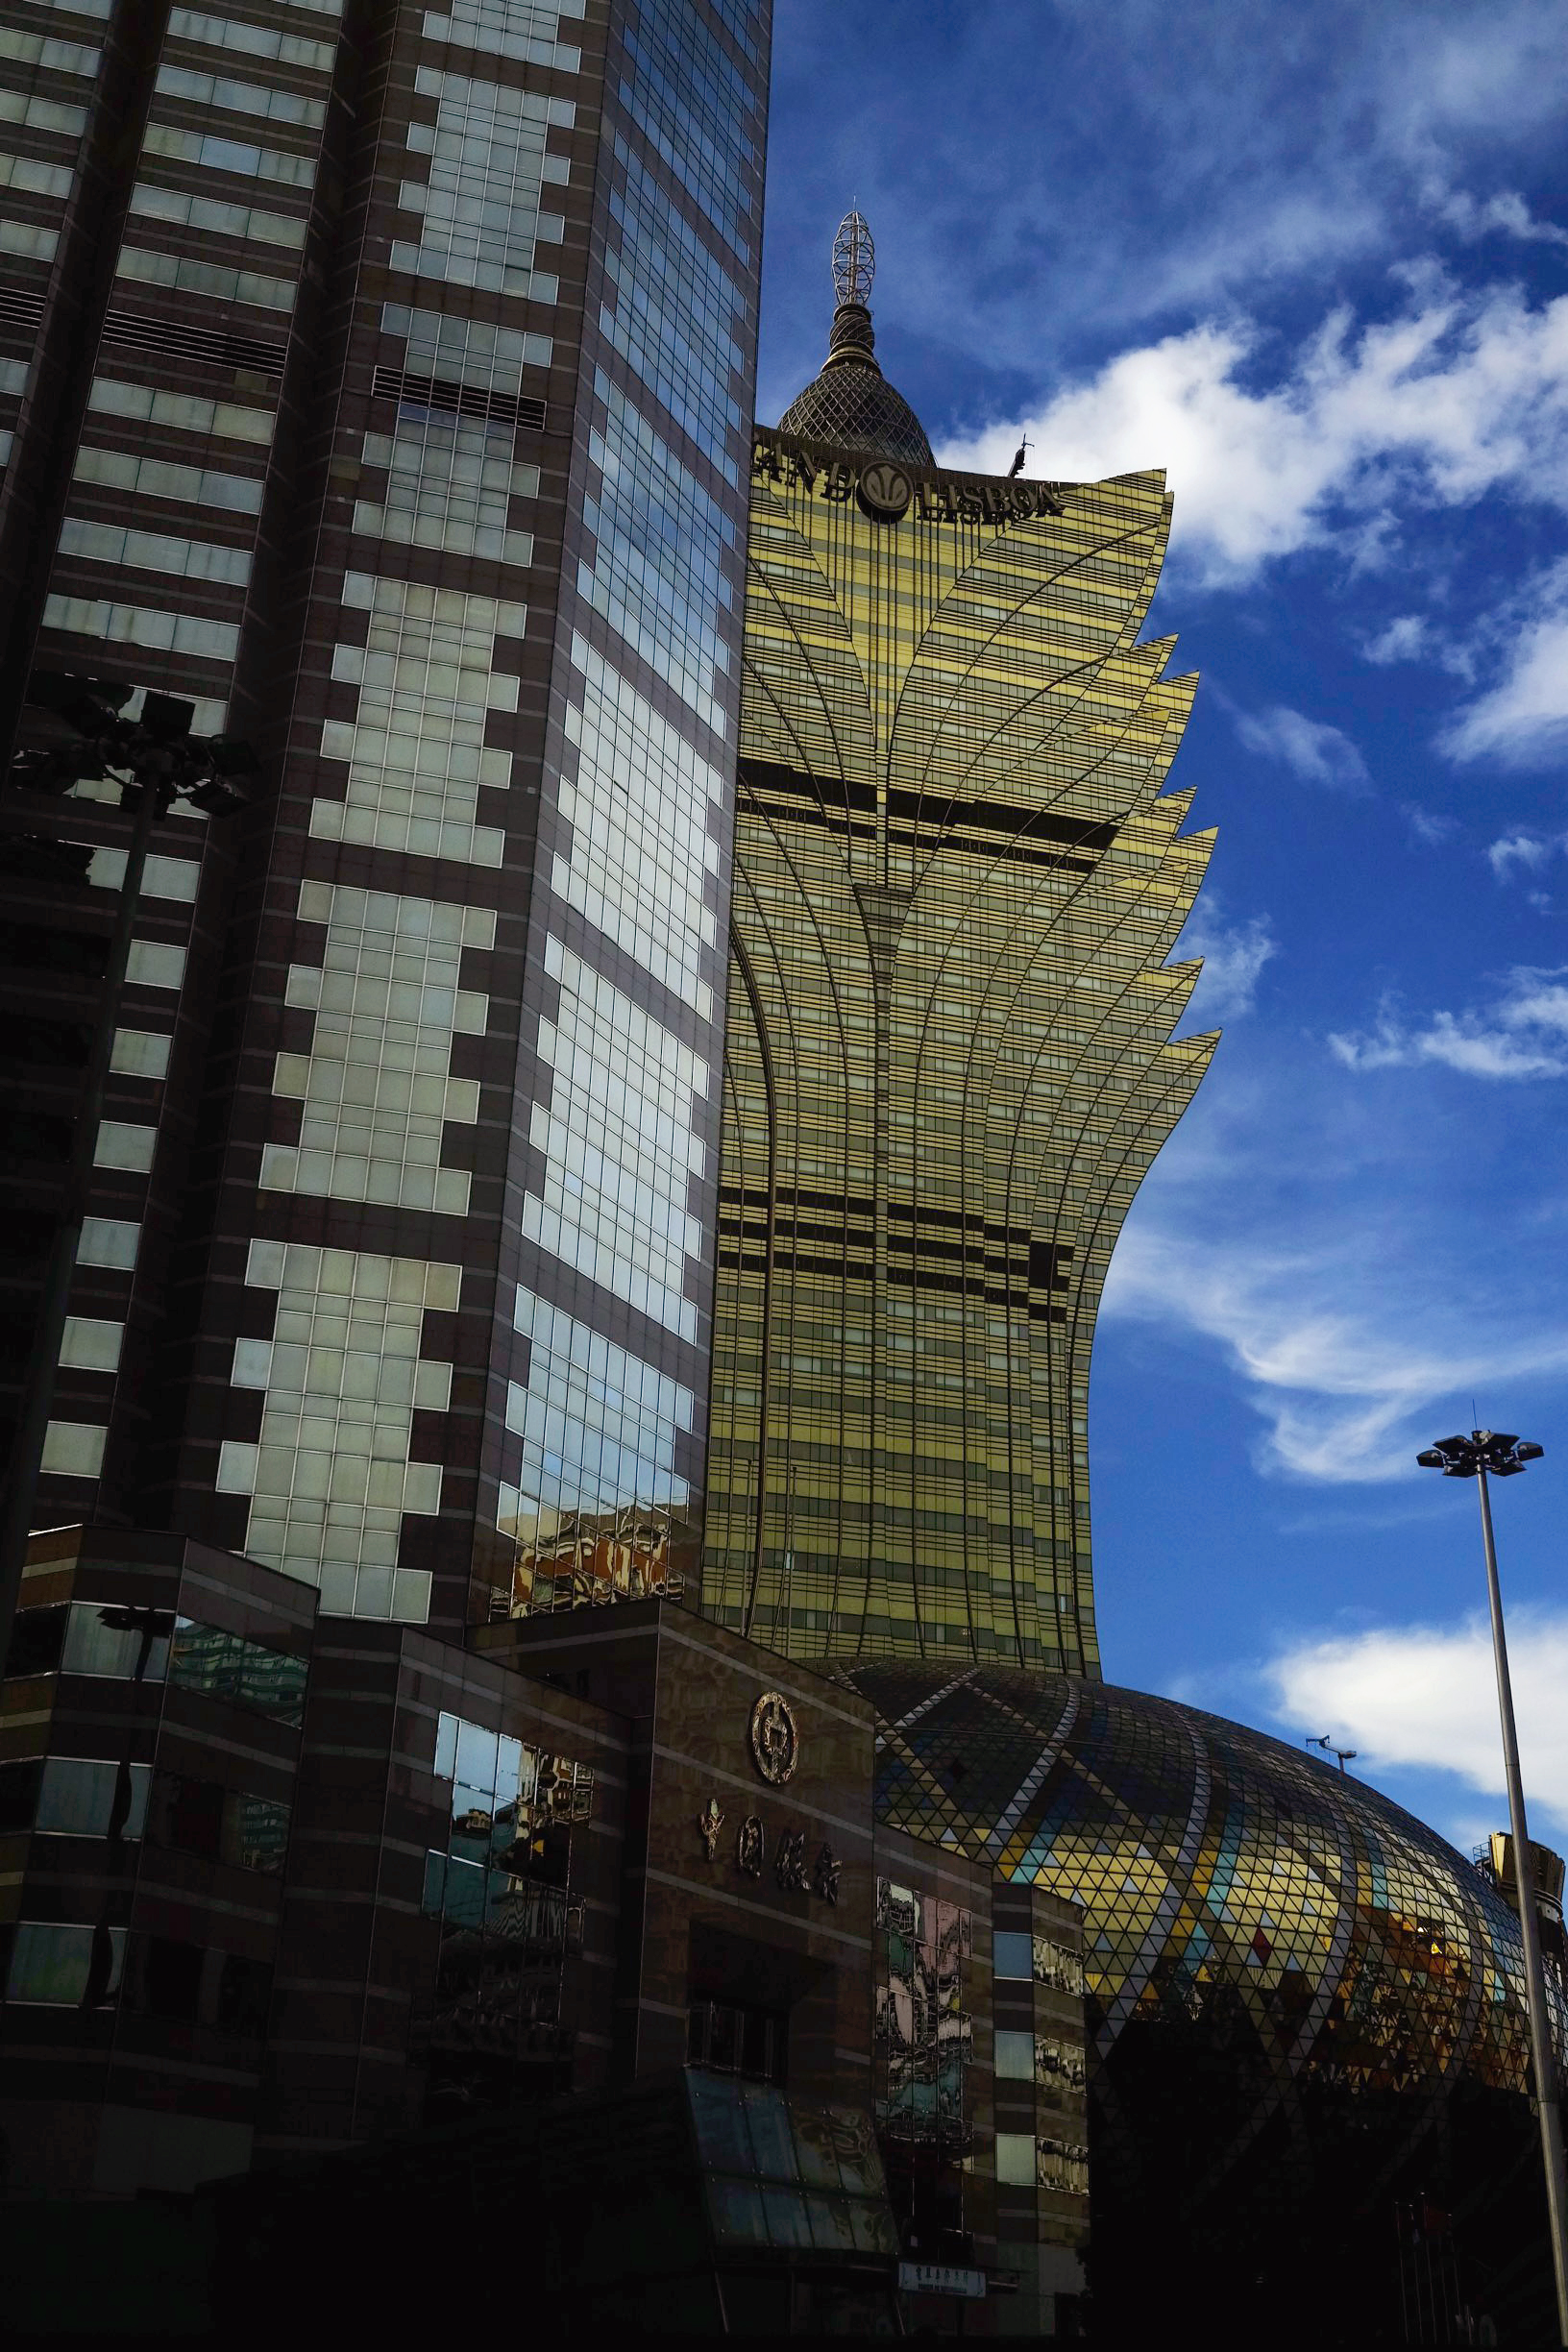  The Grand Lisboa hotel and casino peaks from behind the Bank of China building in Macau, China (Picture was taken from the backseat of a taxi) 